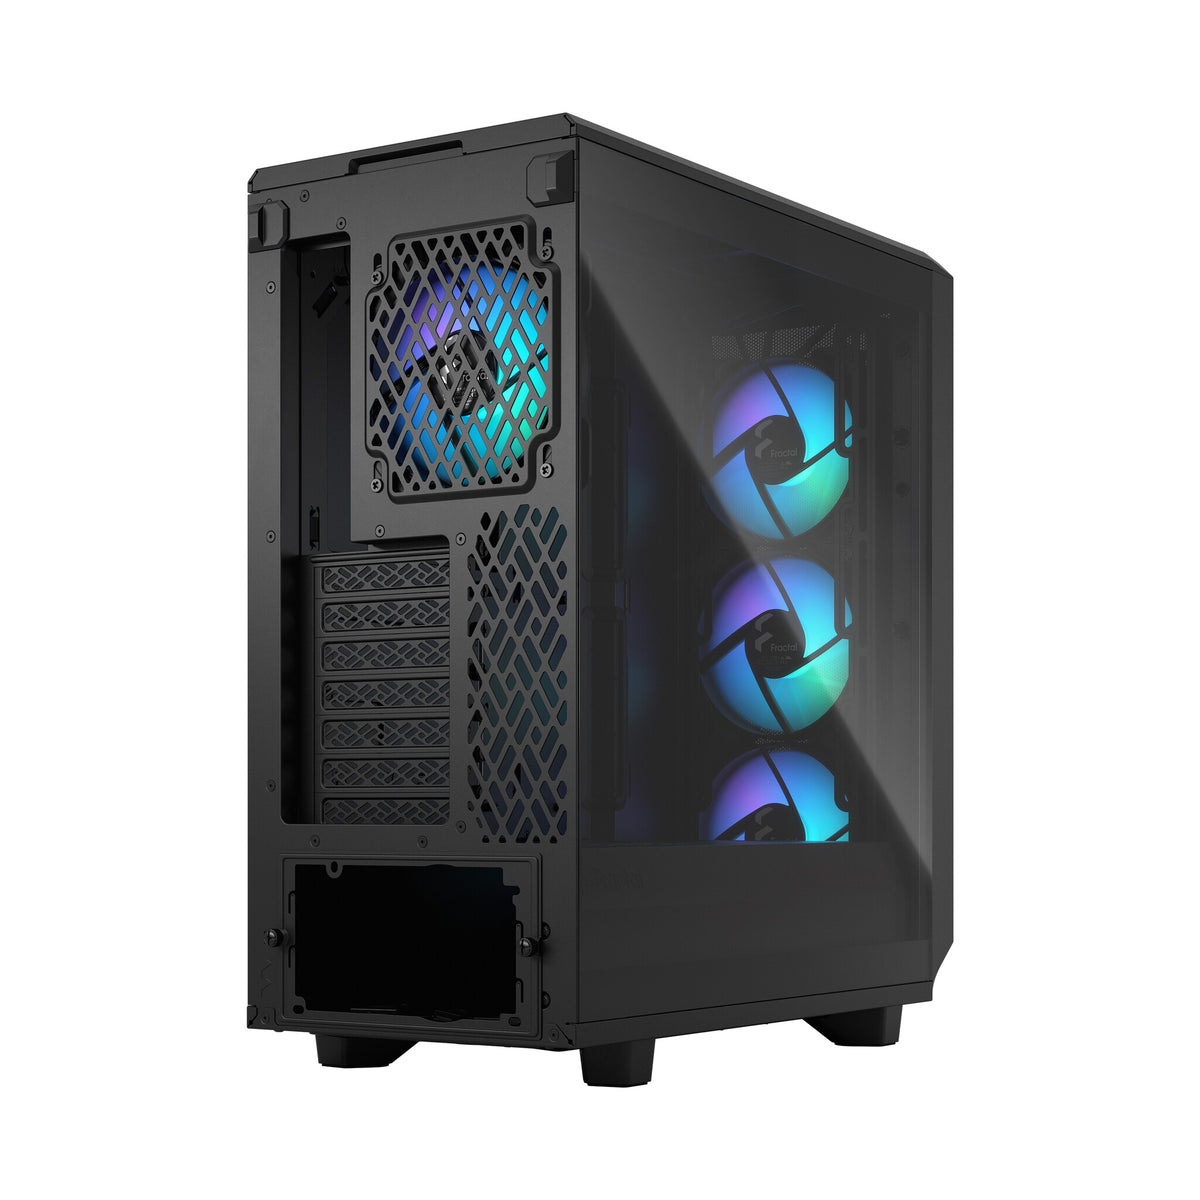 Fractal Design Meshify 2 Compact RGB - ATX Mid Tower Case in Black